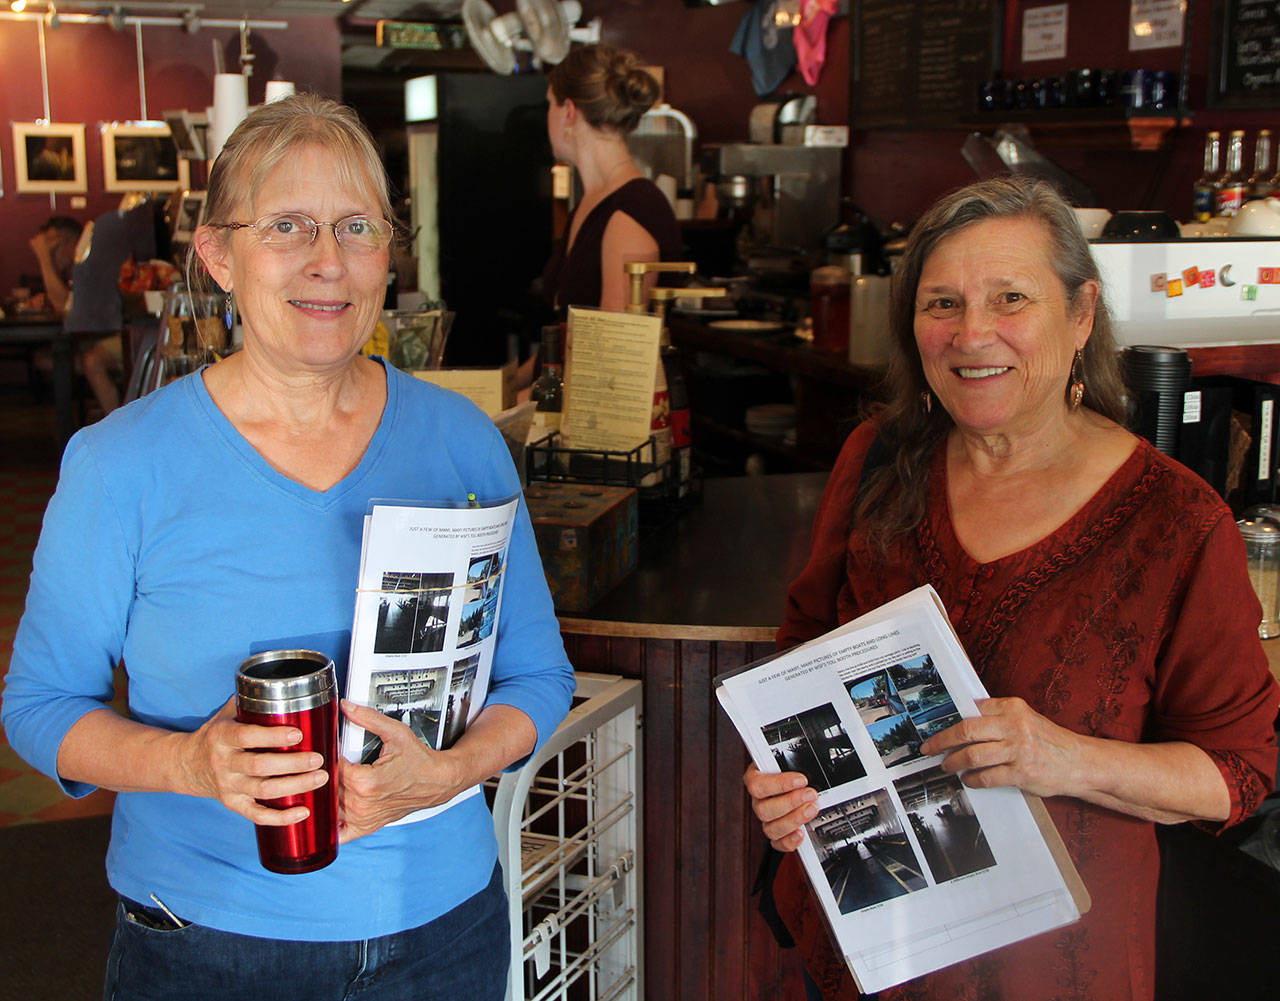 Holly Shull Vogel, left, and Kathy Abascal take a break at Cafe Luna from counting petition signatures. (Courtesy photo)